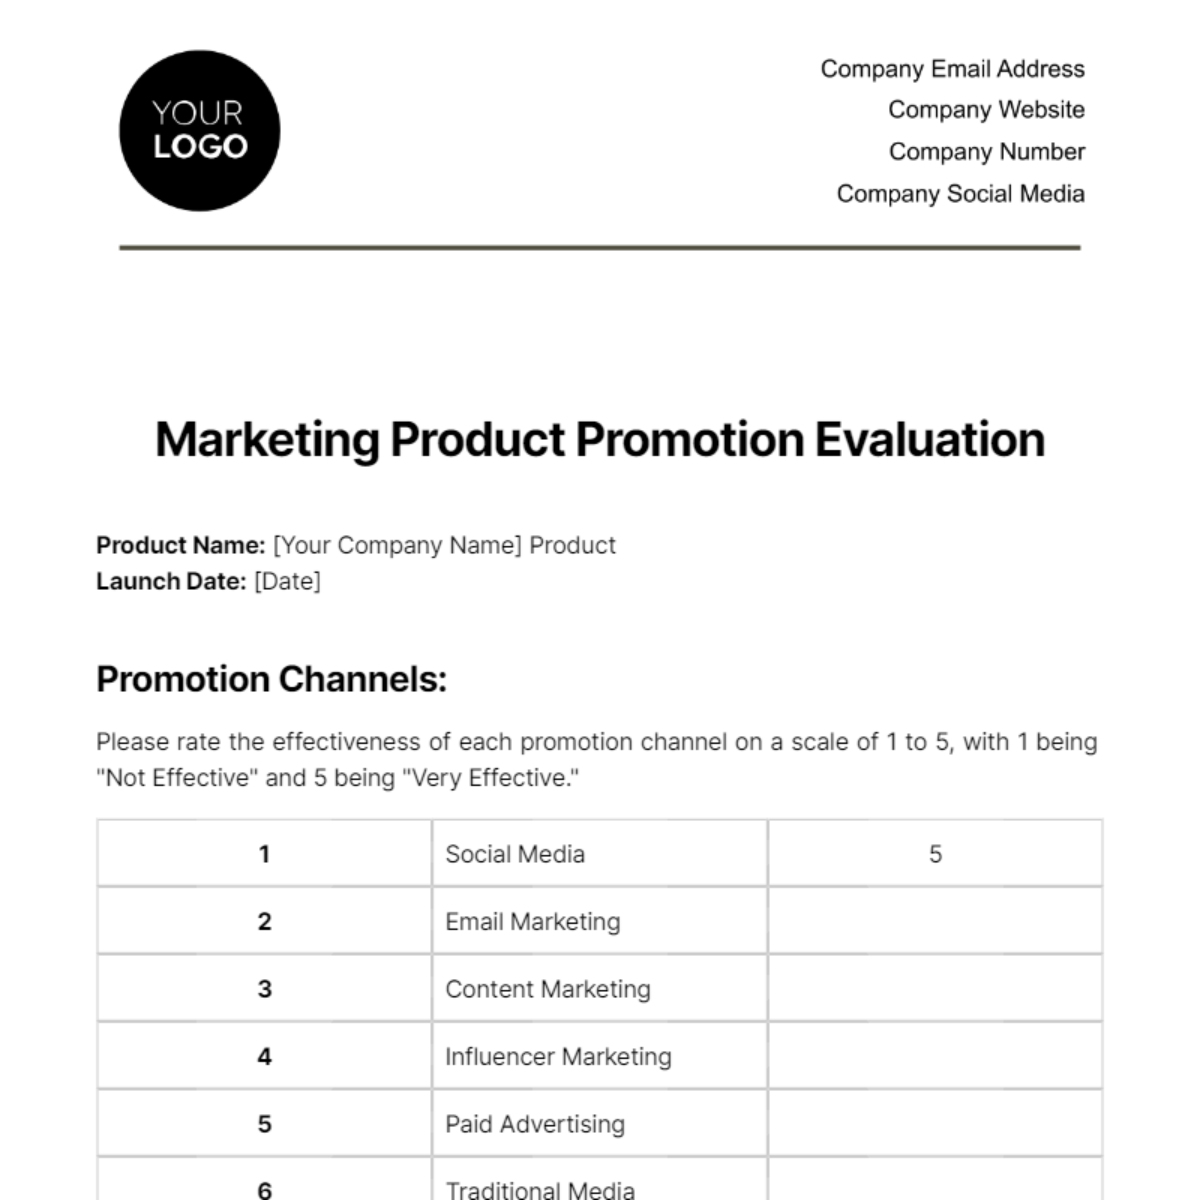 Marketing Product Promotion Evaluation Template